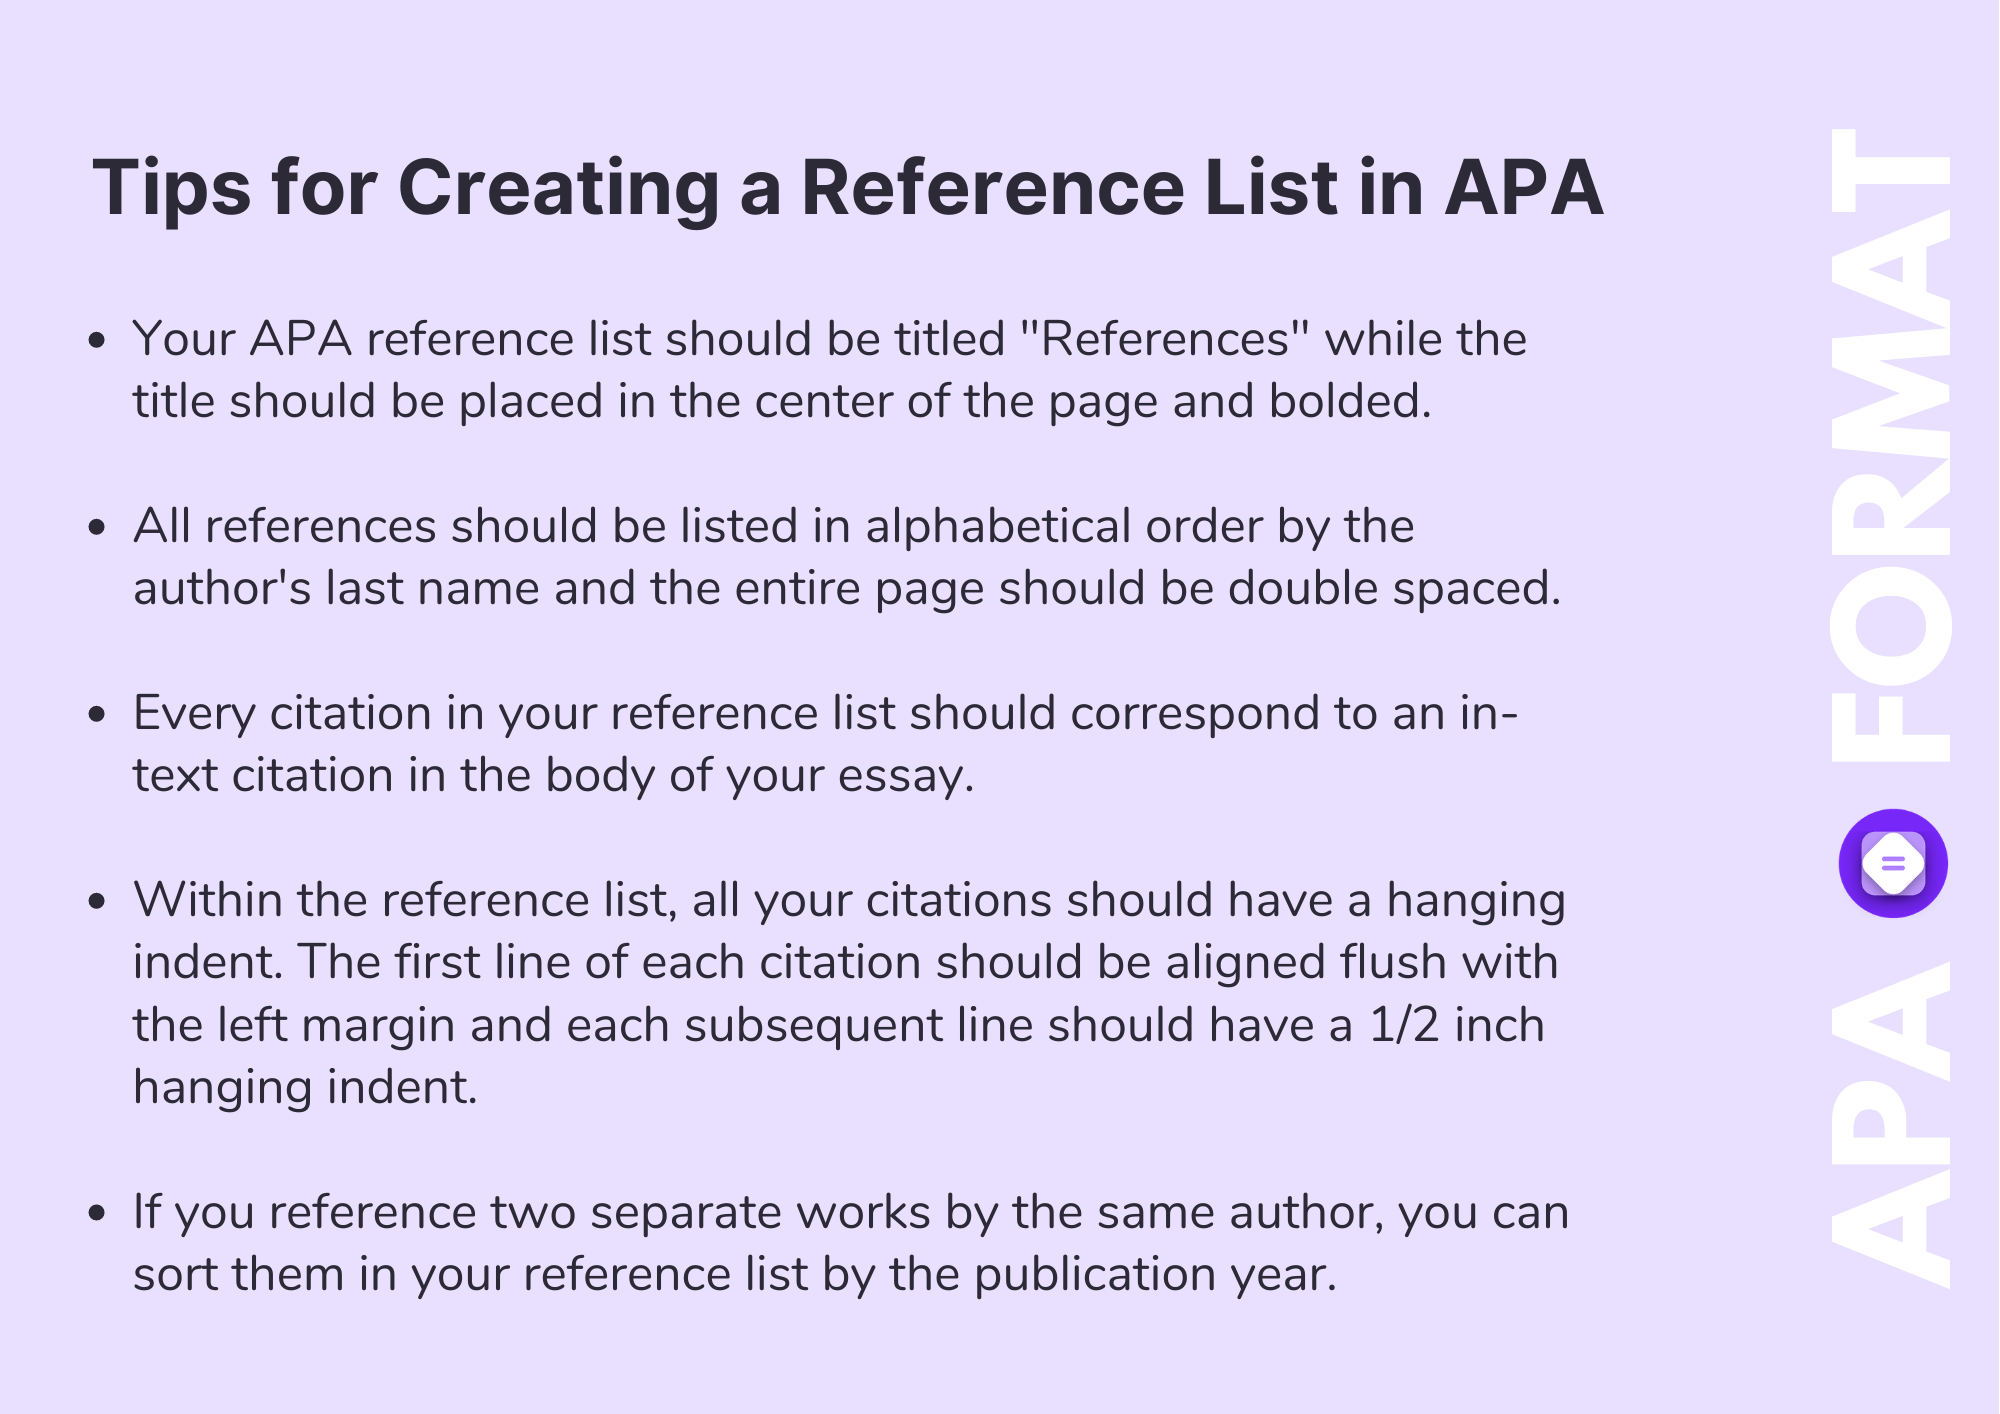 How to format a bibliography in APA Format